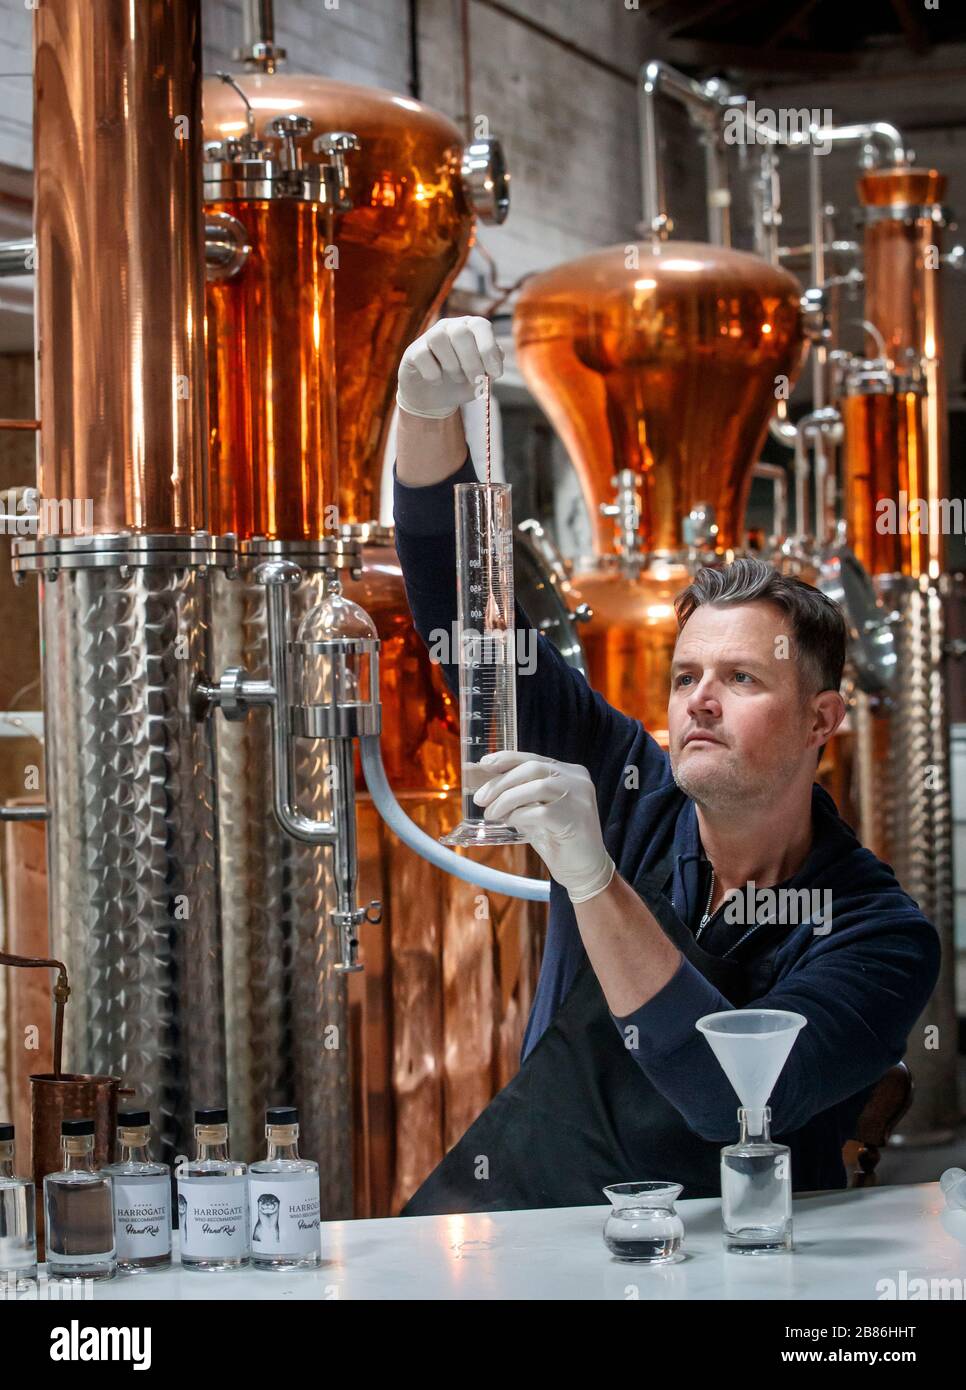 Steven Green, founder of Harrogate Tipple, makes hand sanitiser at his gin distillery in North Yorkshire, as his company starts to produce sanitiser in line with World Health Organisation recommendations to boost supply amid the coronavirus crisis. Stock Photo